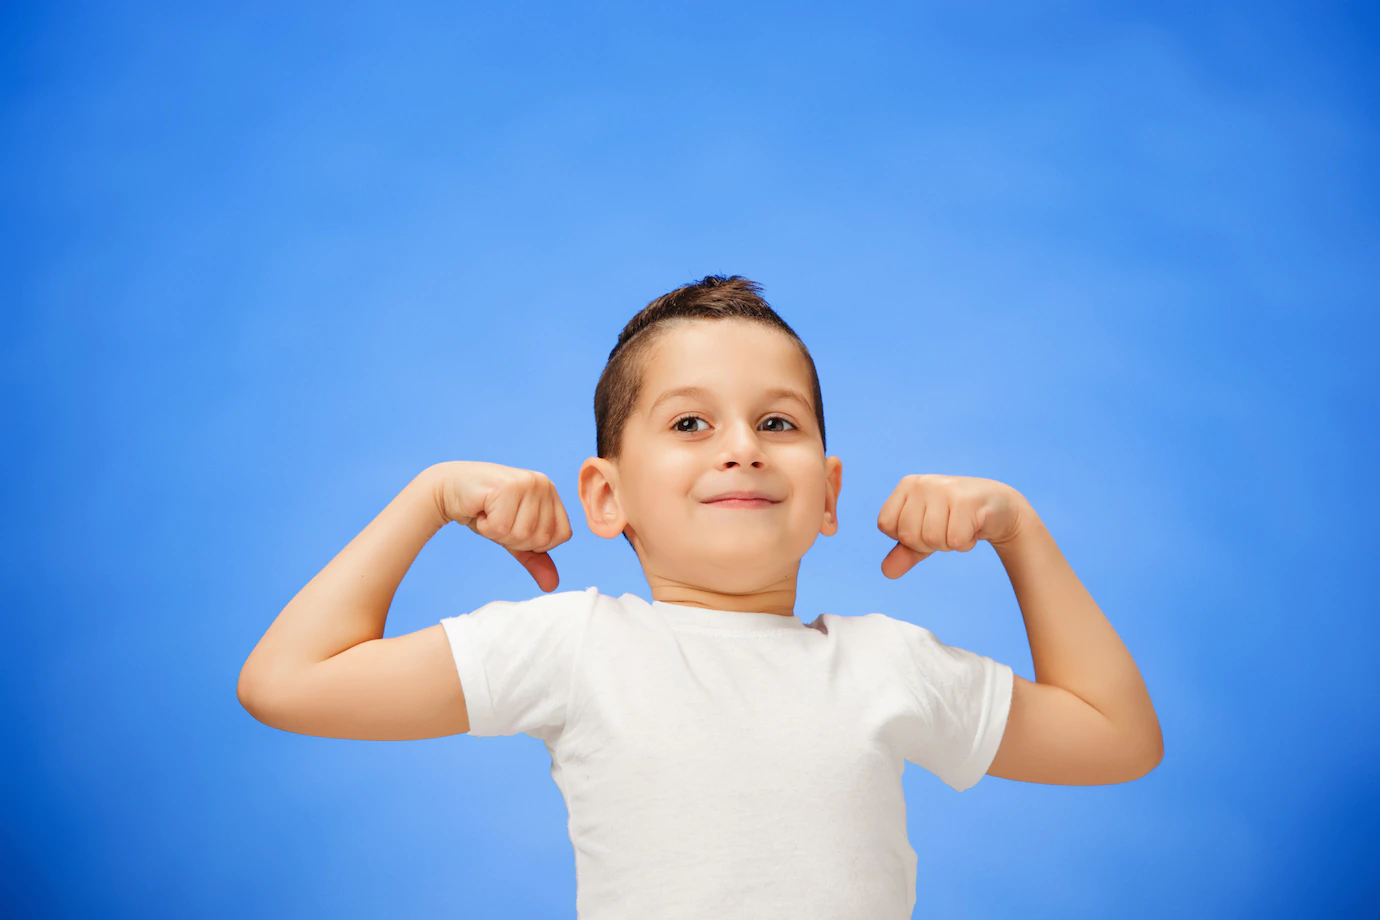 9 Amazing Benefits Of Exercise For Kids That Will Motivate Them To Start Today